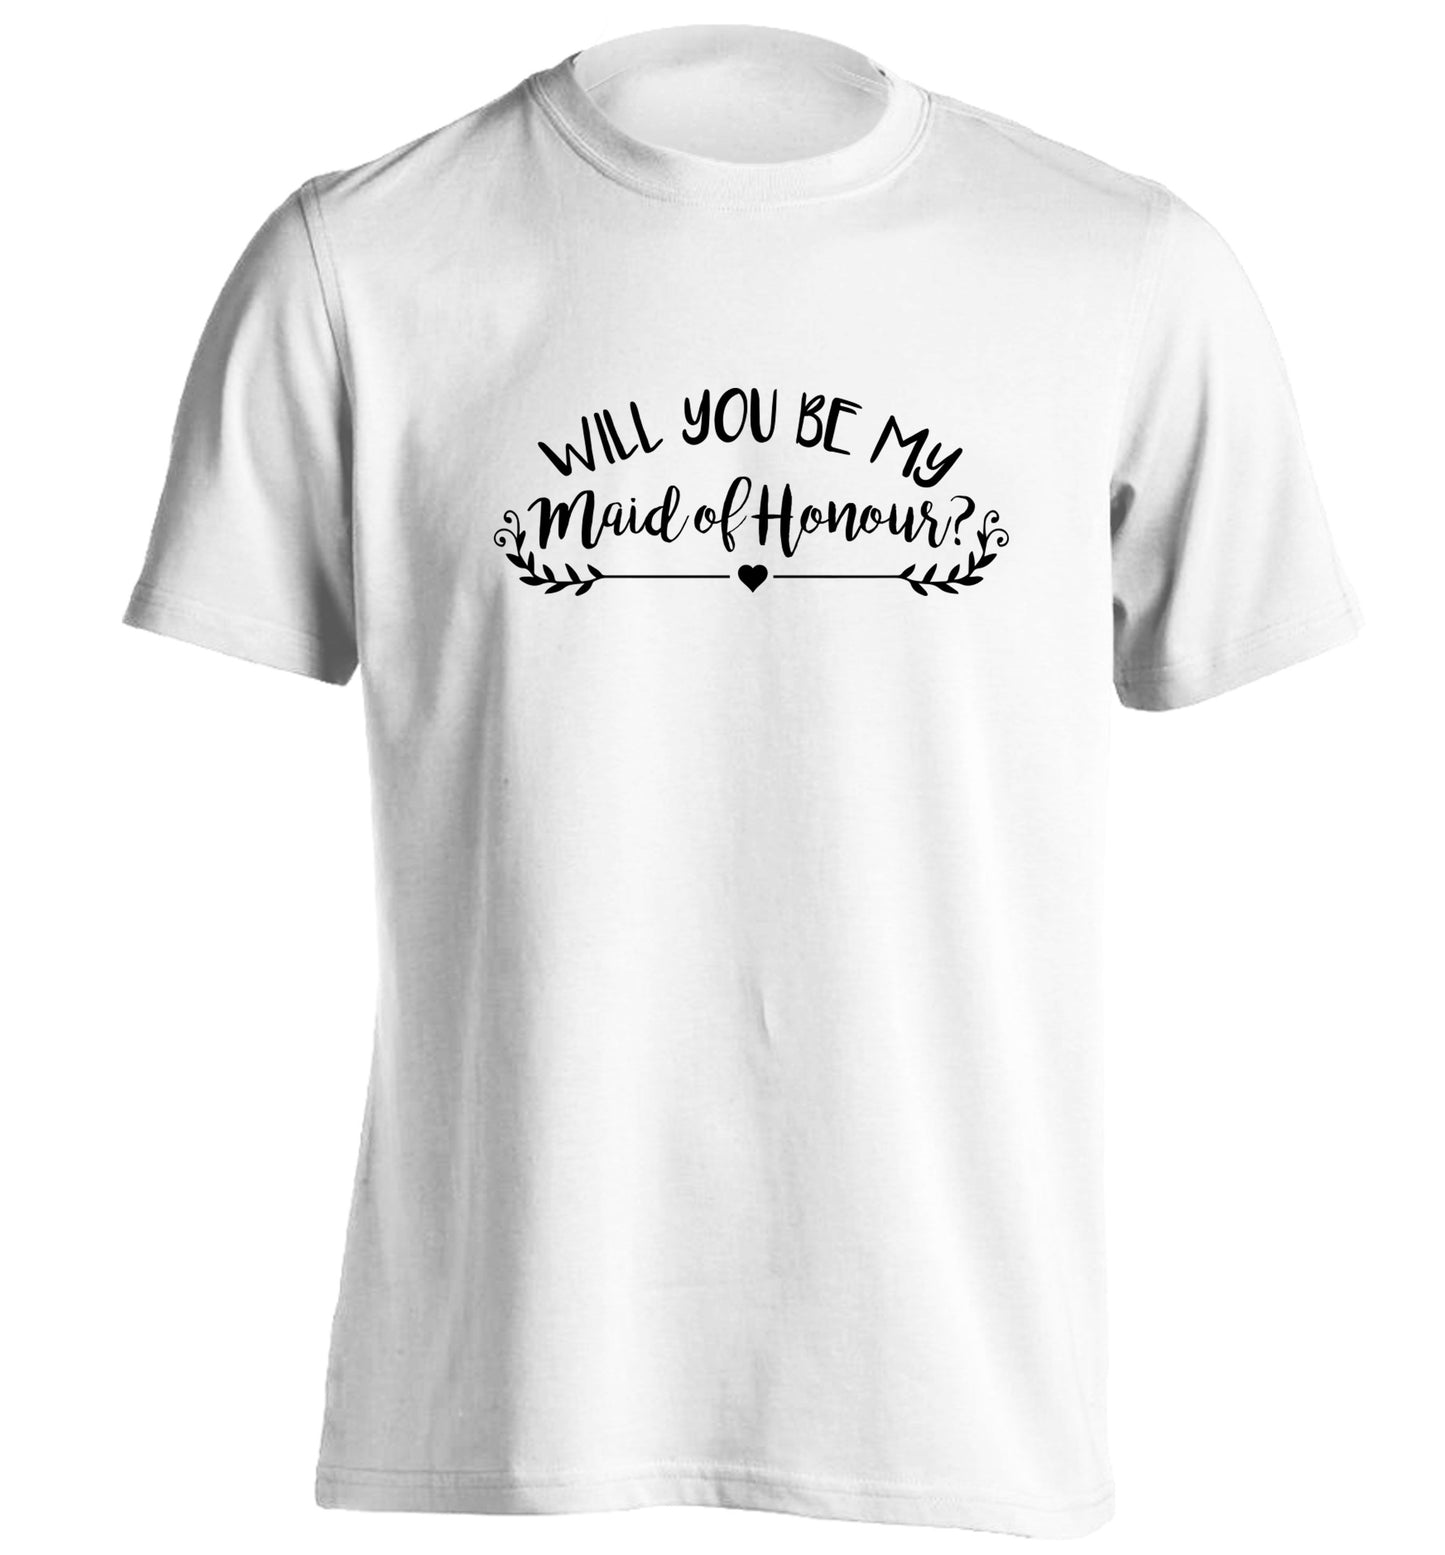 Will you be my maid of honour? adults unisex white Tshirt 2XL